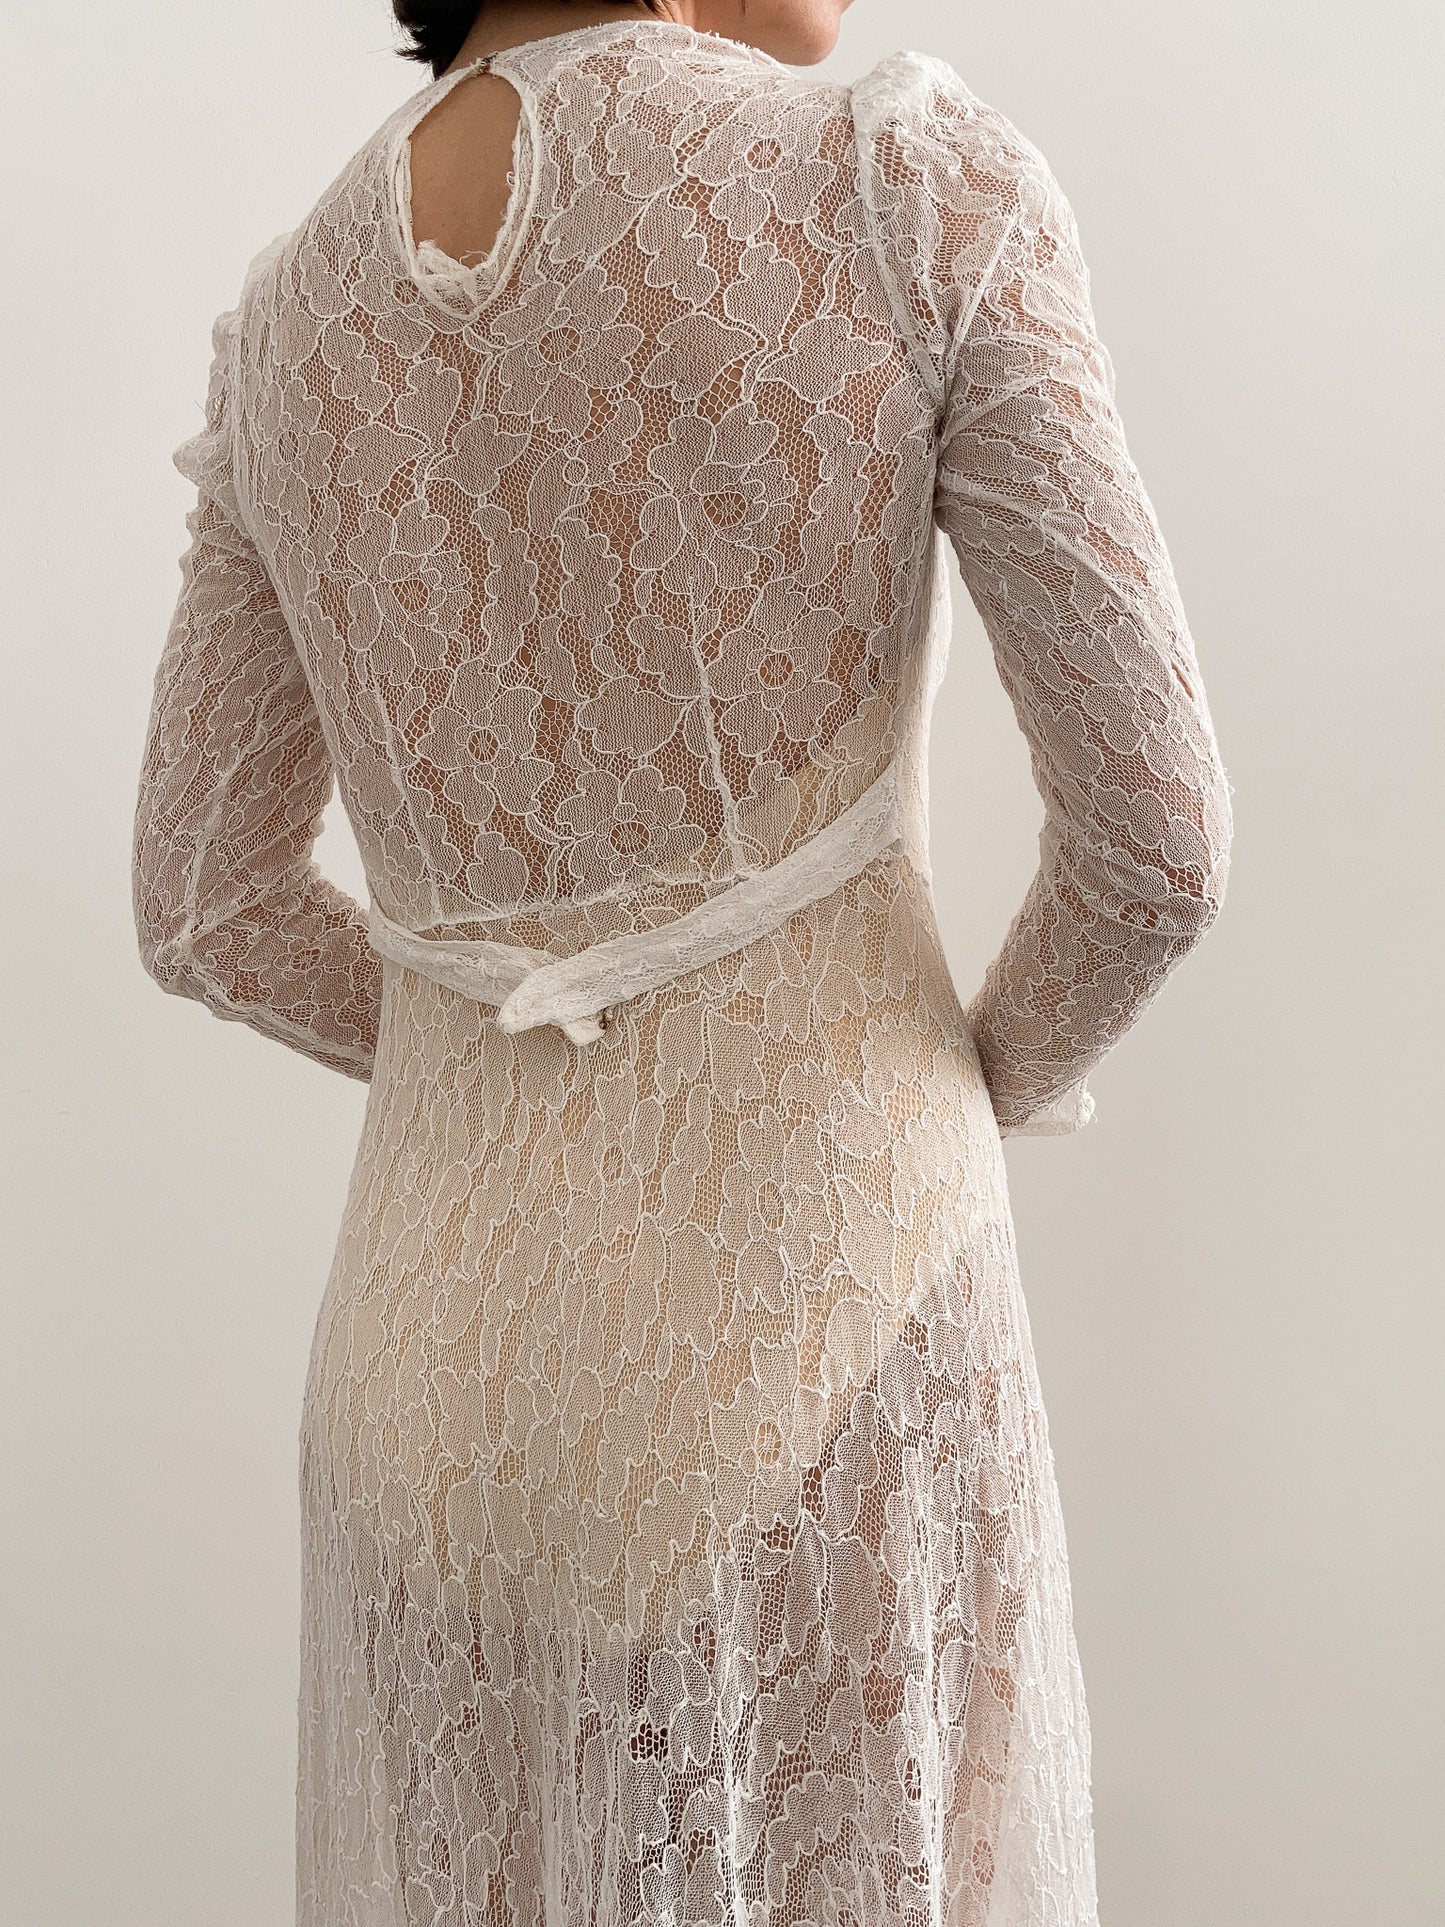 1930s Floral All Lace Wedding Gown